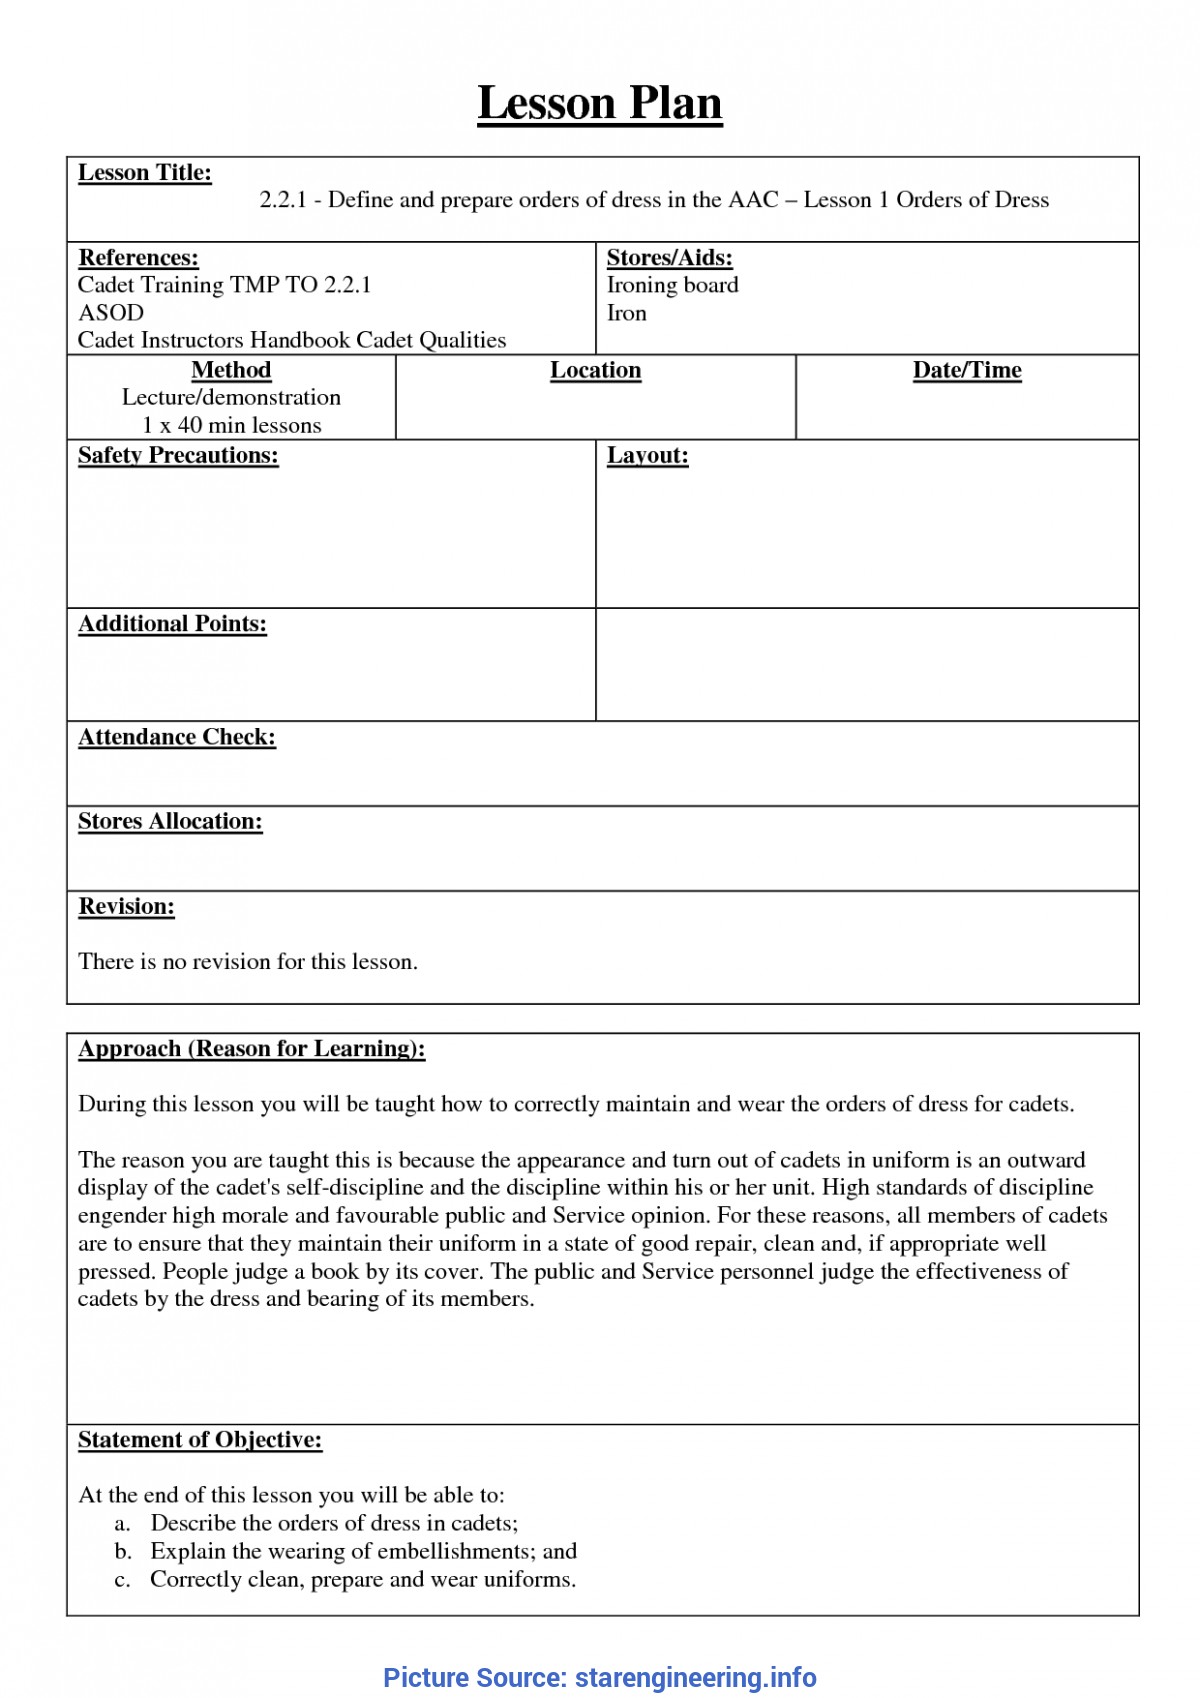 Lesson Plan Template Nsw Ten Fantastic Vacation Ideas For Lesson Plan 